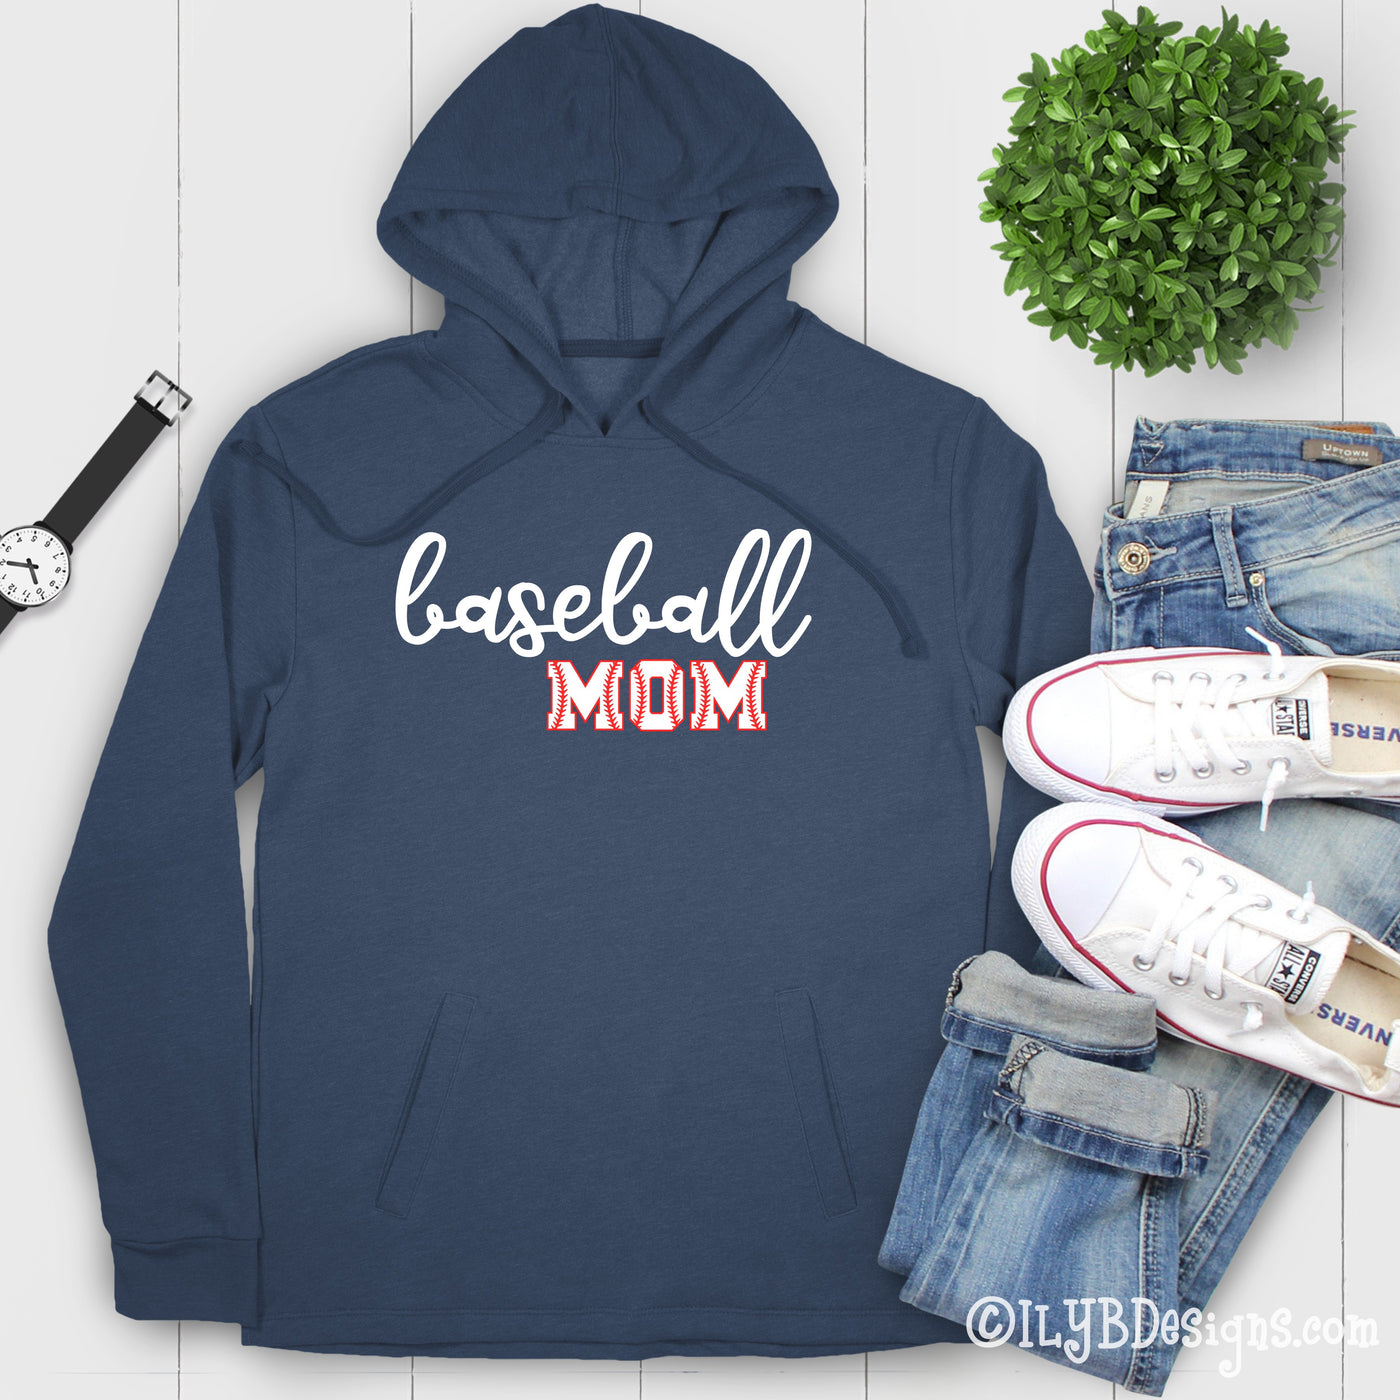 Navy hoodie with baseball written in white script with mom underneath in red and white letters that look like baseballs.